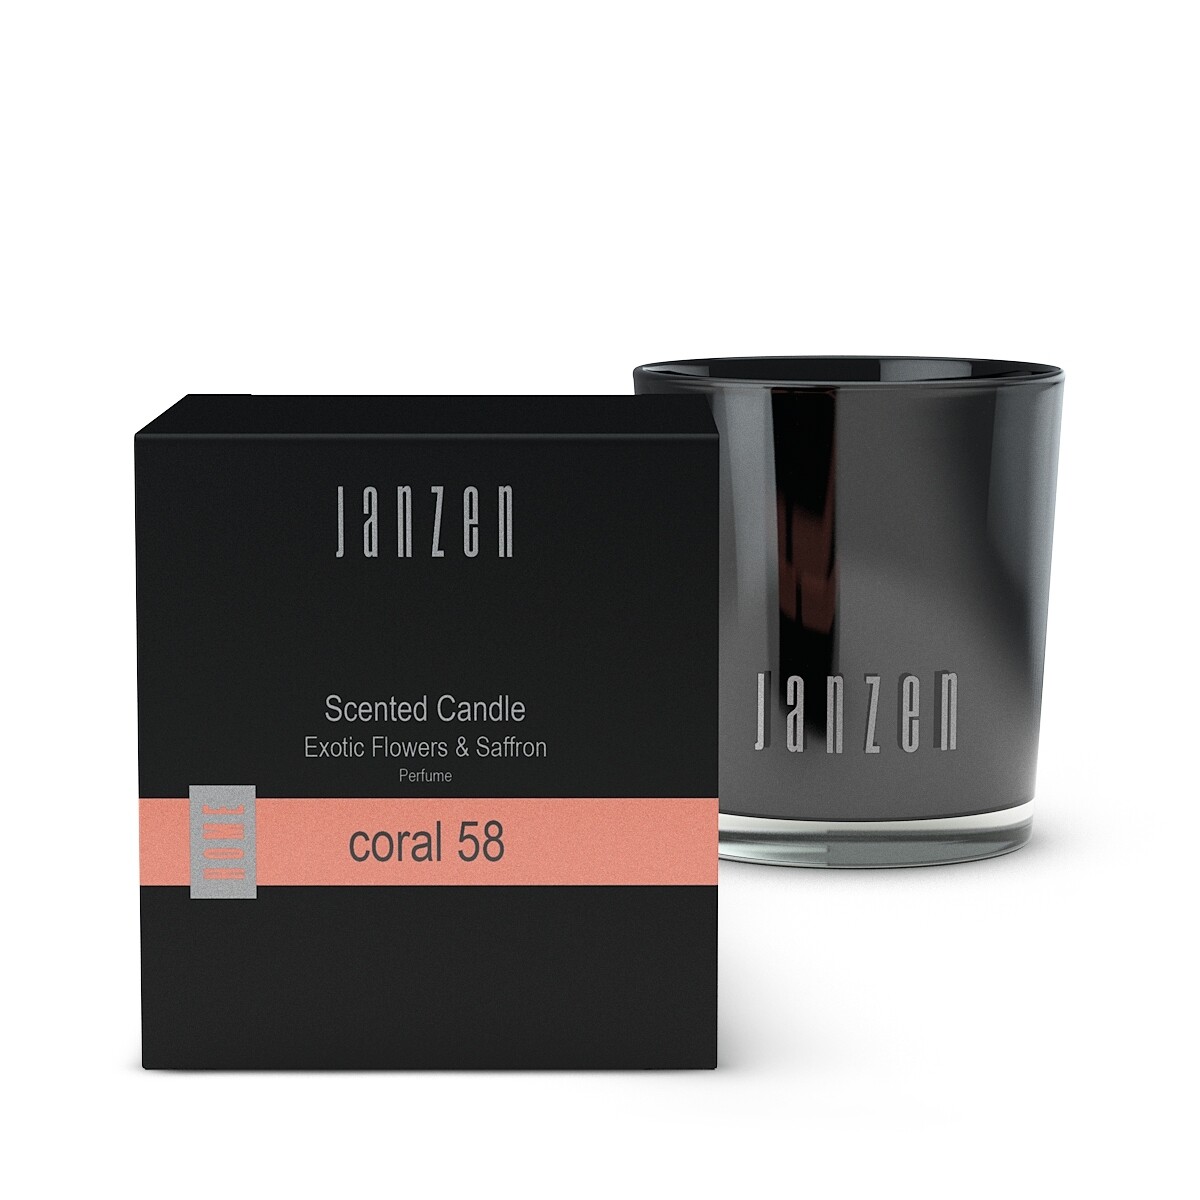 SCENTED CANDLE CORAL58 | JANZEN